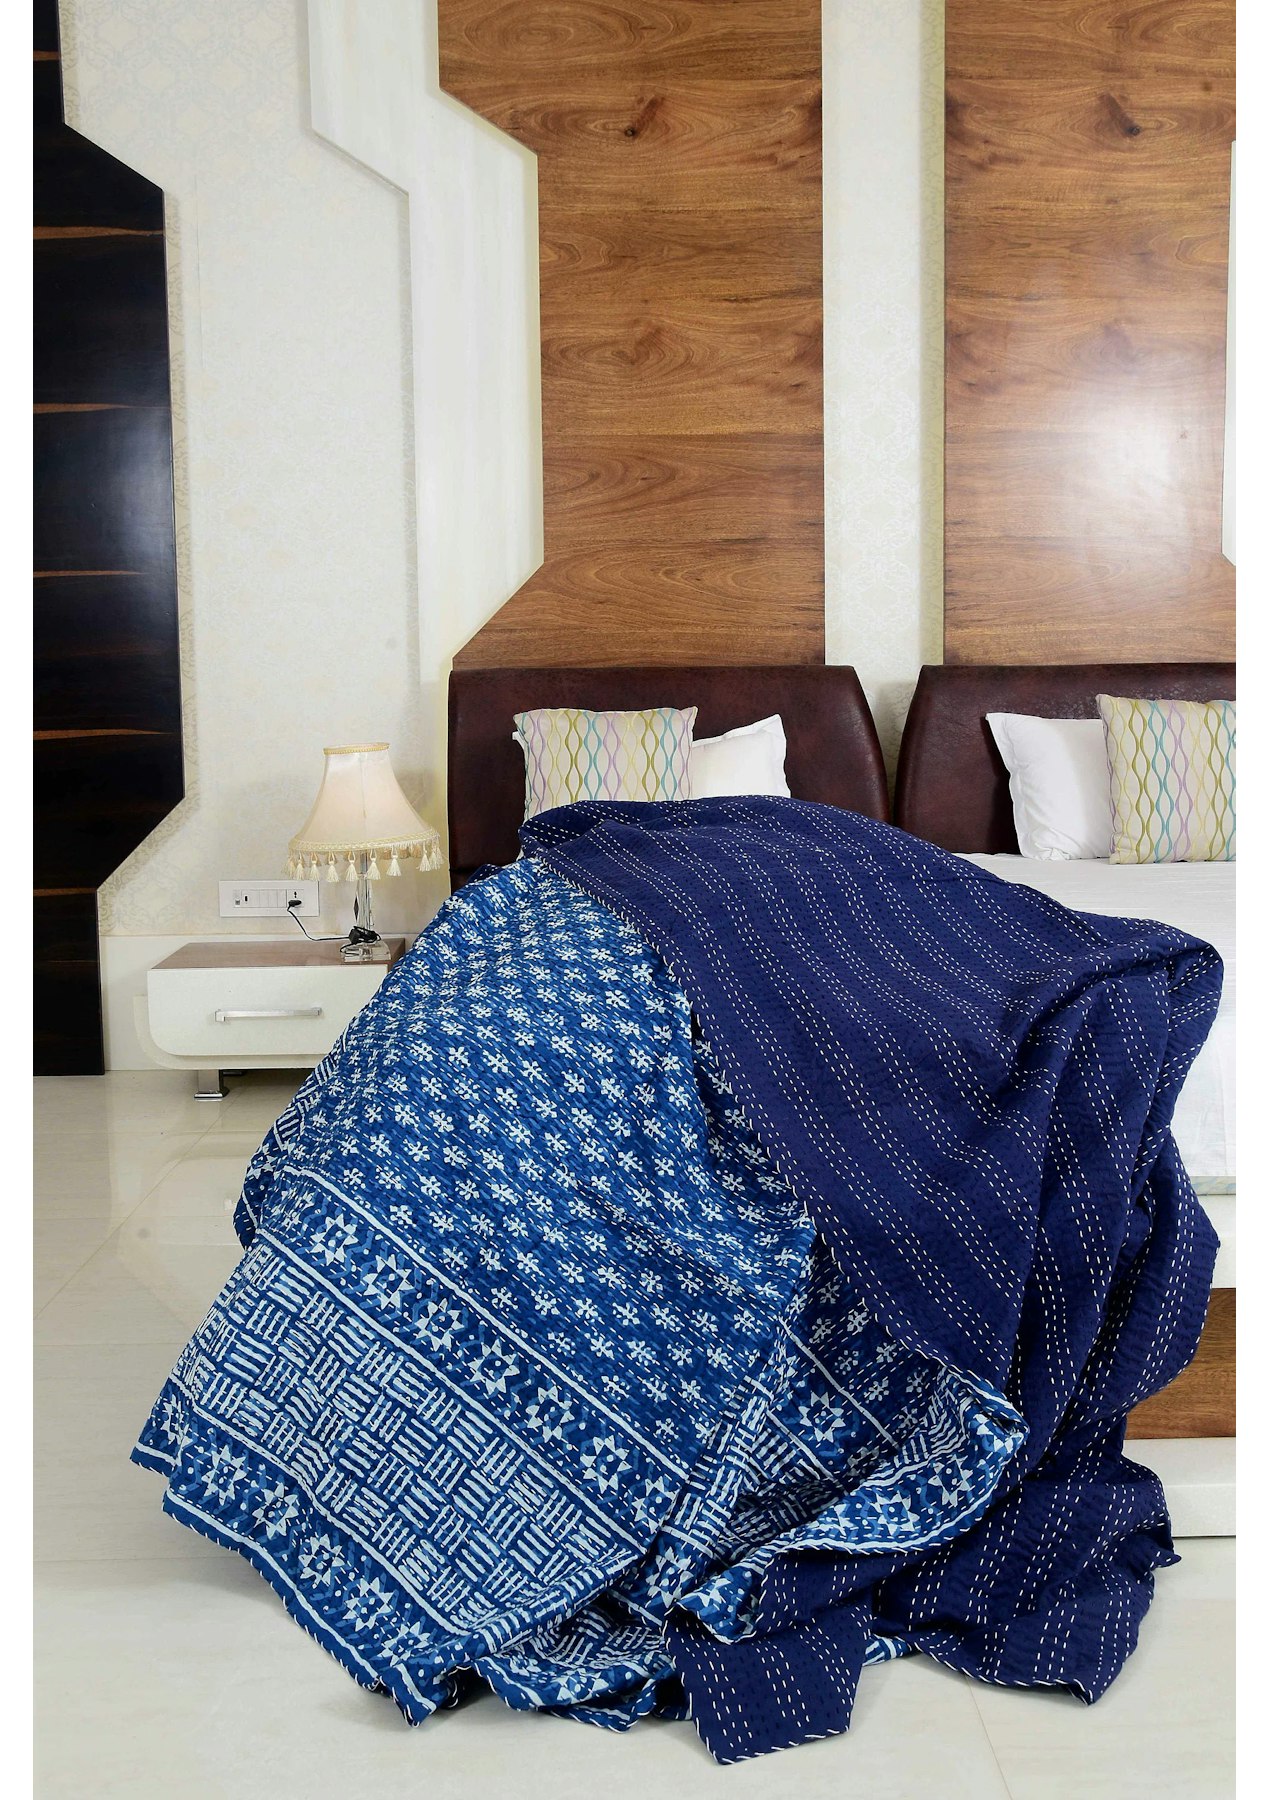 Indian Embroidery Kantha Quilt Bedspread Block Print Throw Cotton Blue 